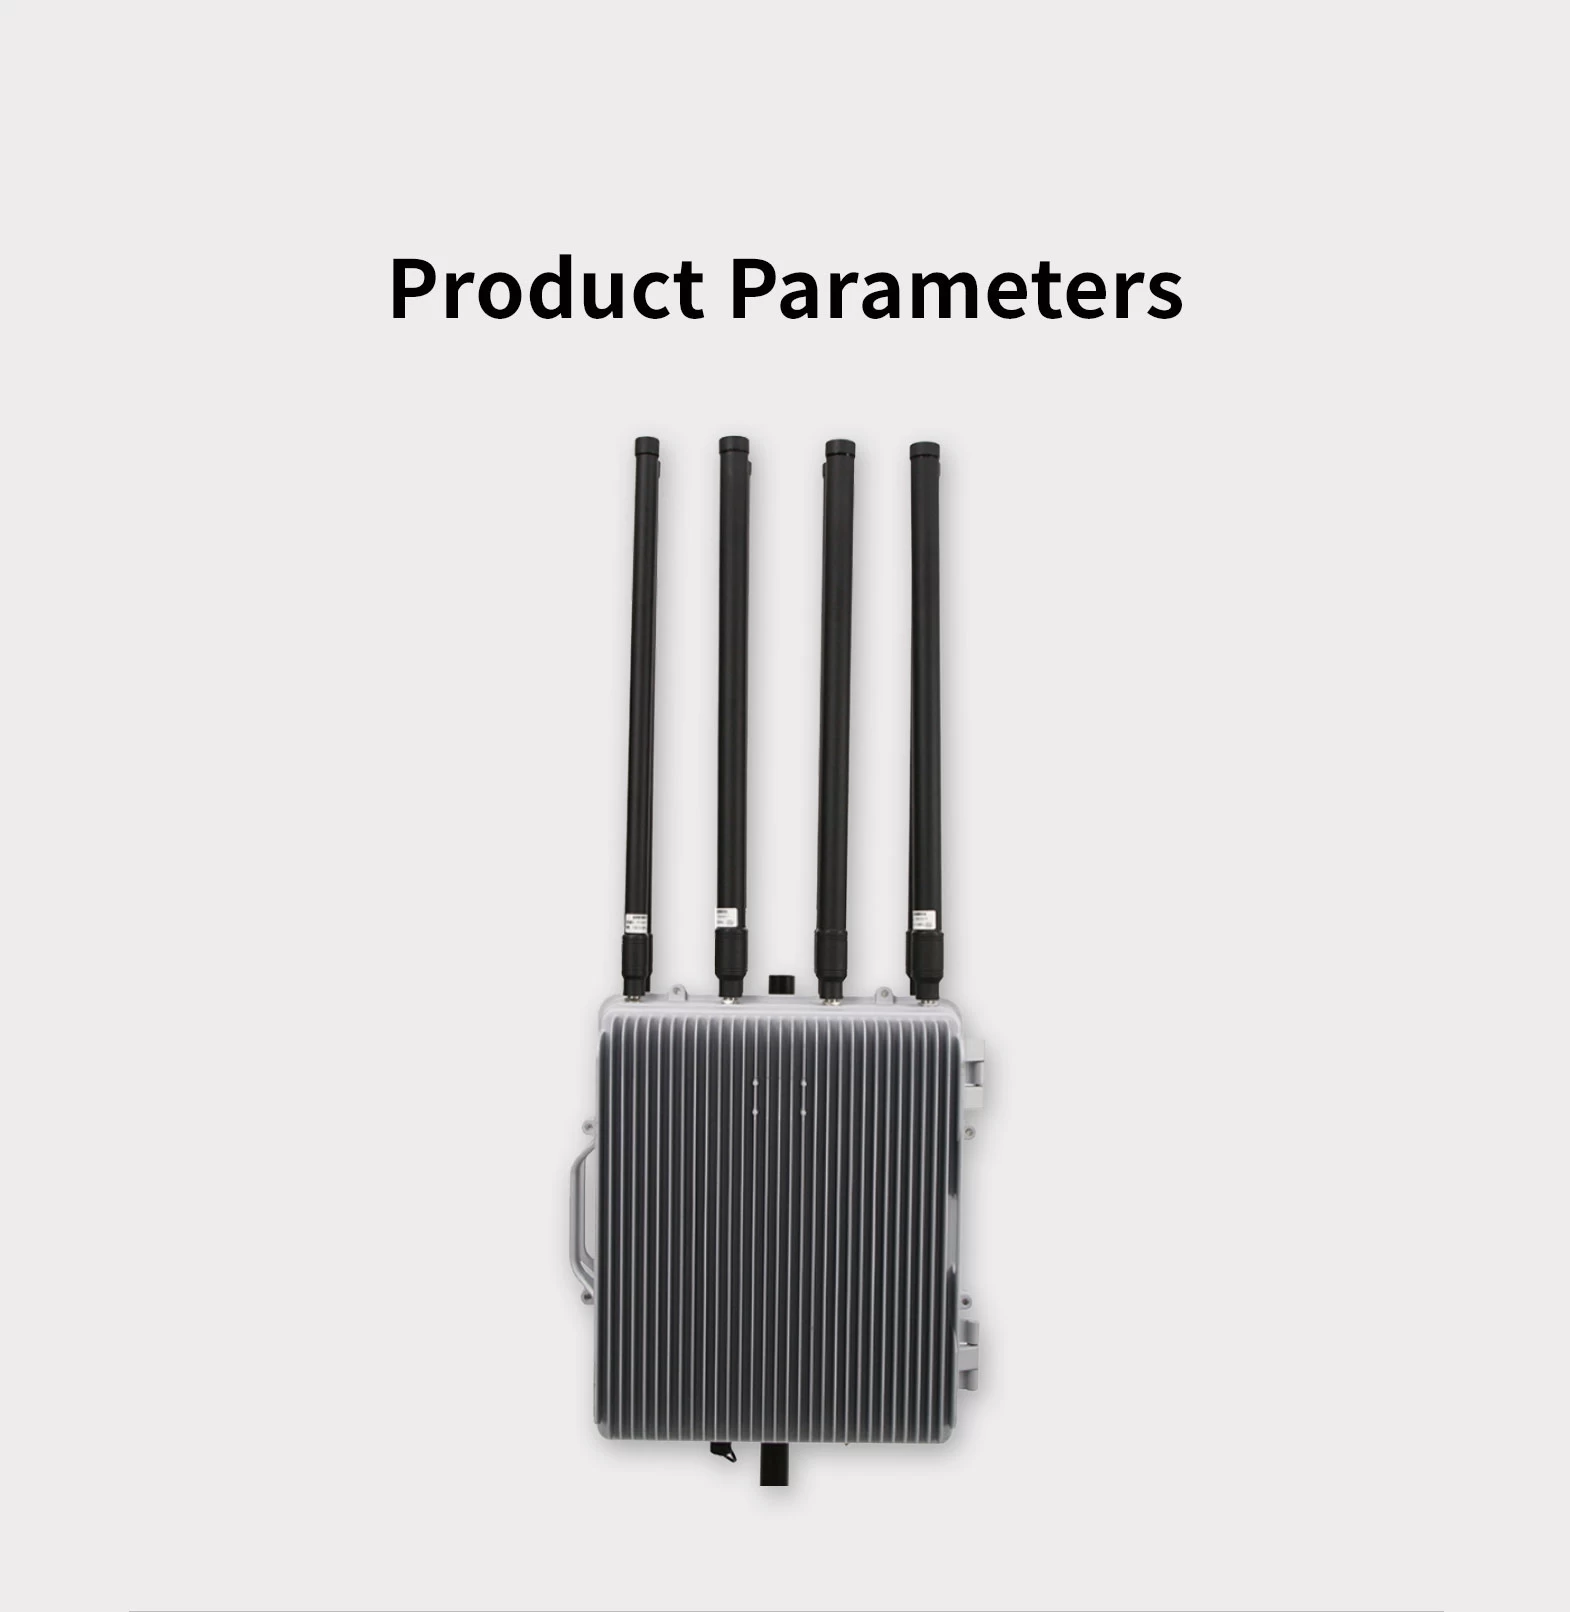 Drone RF Jammer TXPS2000 - Drone Defense - 2